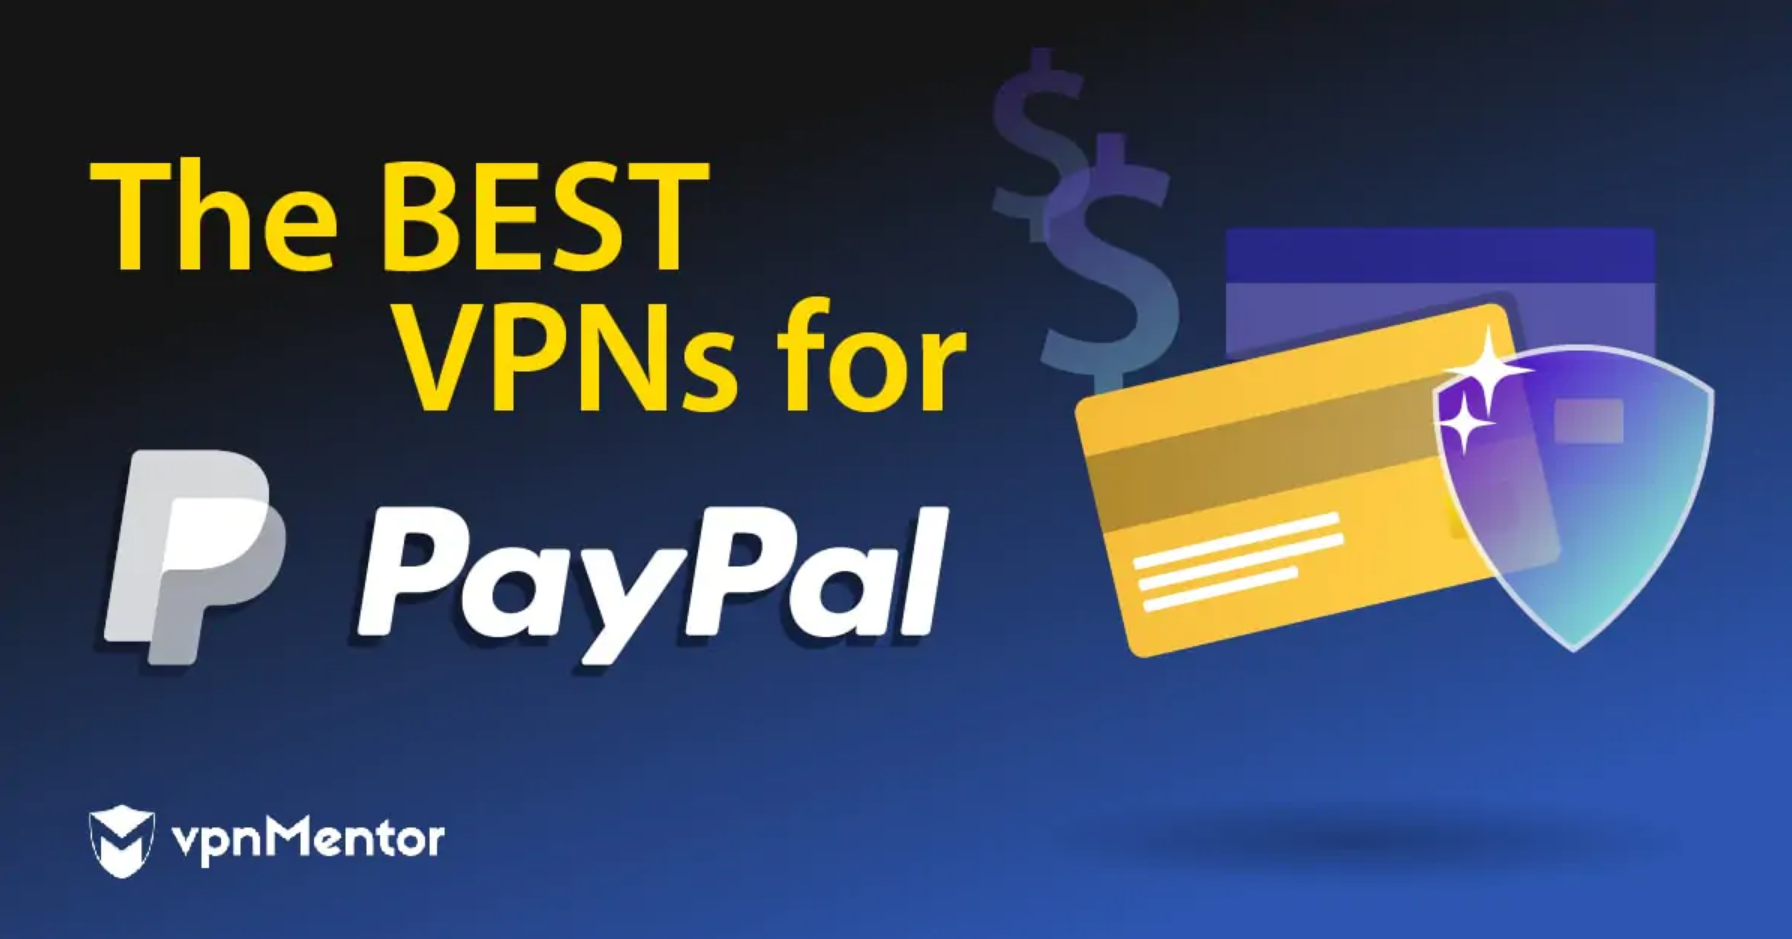 The best VPNs for PayPal